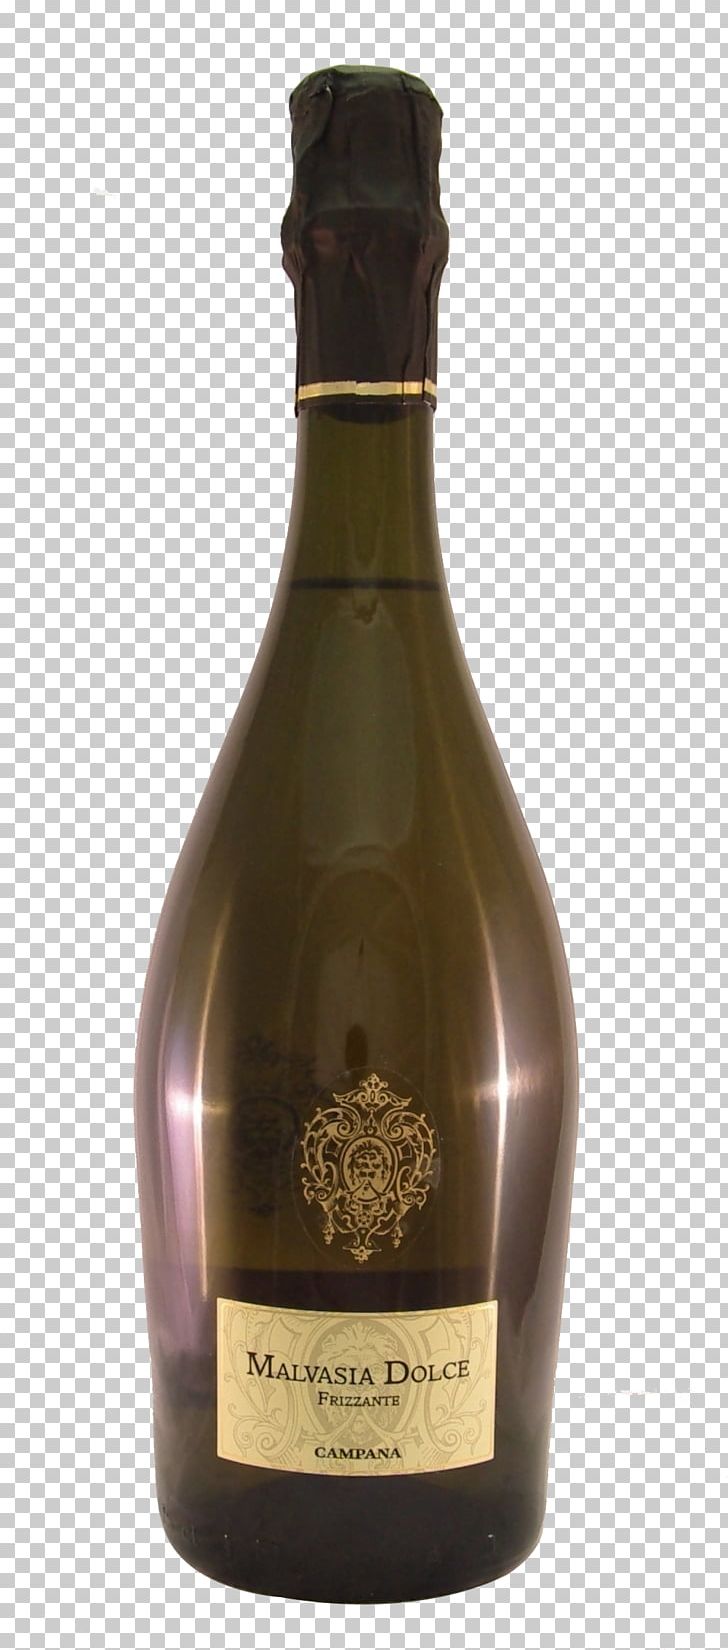 Champagne Glass Bottle Wine PNG, Clipart, Alcoholic Beverage, Bottle, Champagne, Cons, Drink Free PNG Download